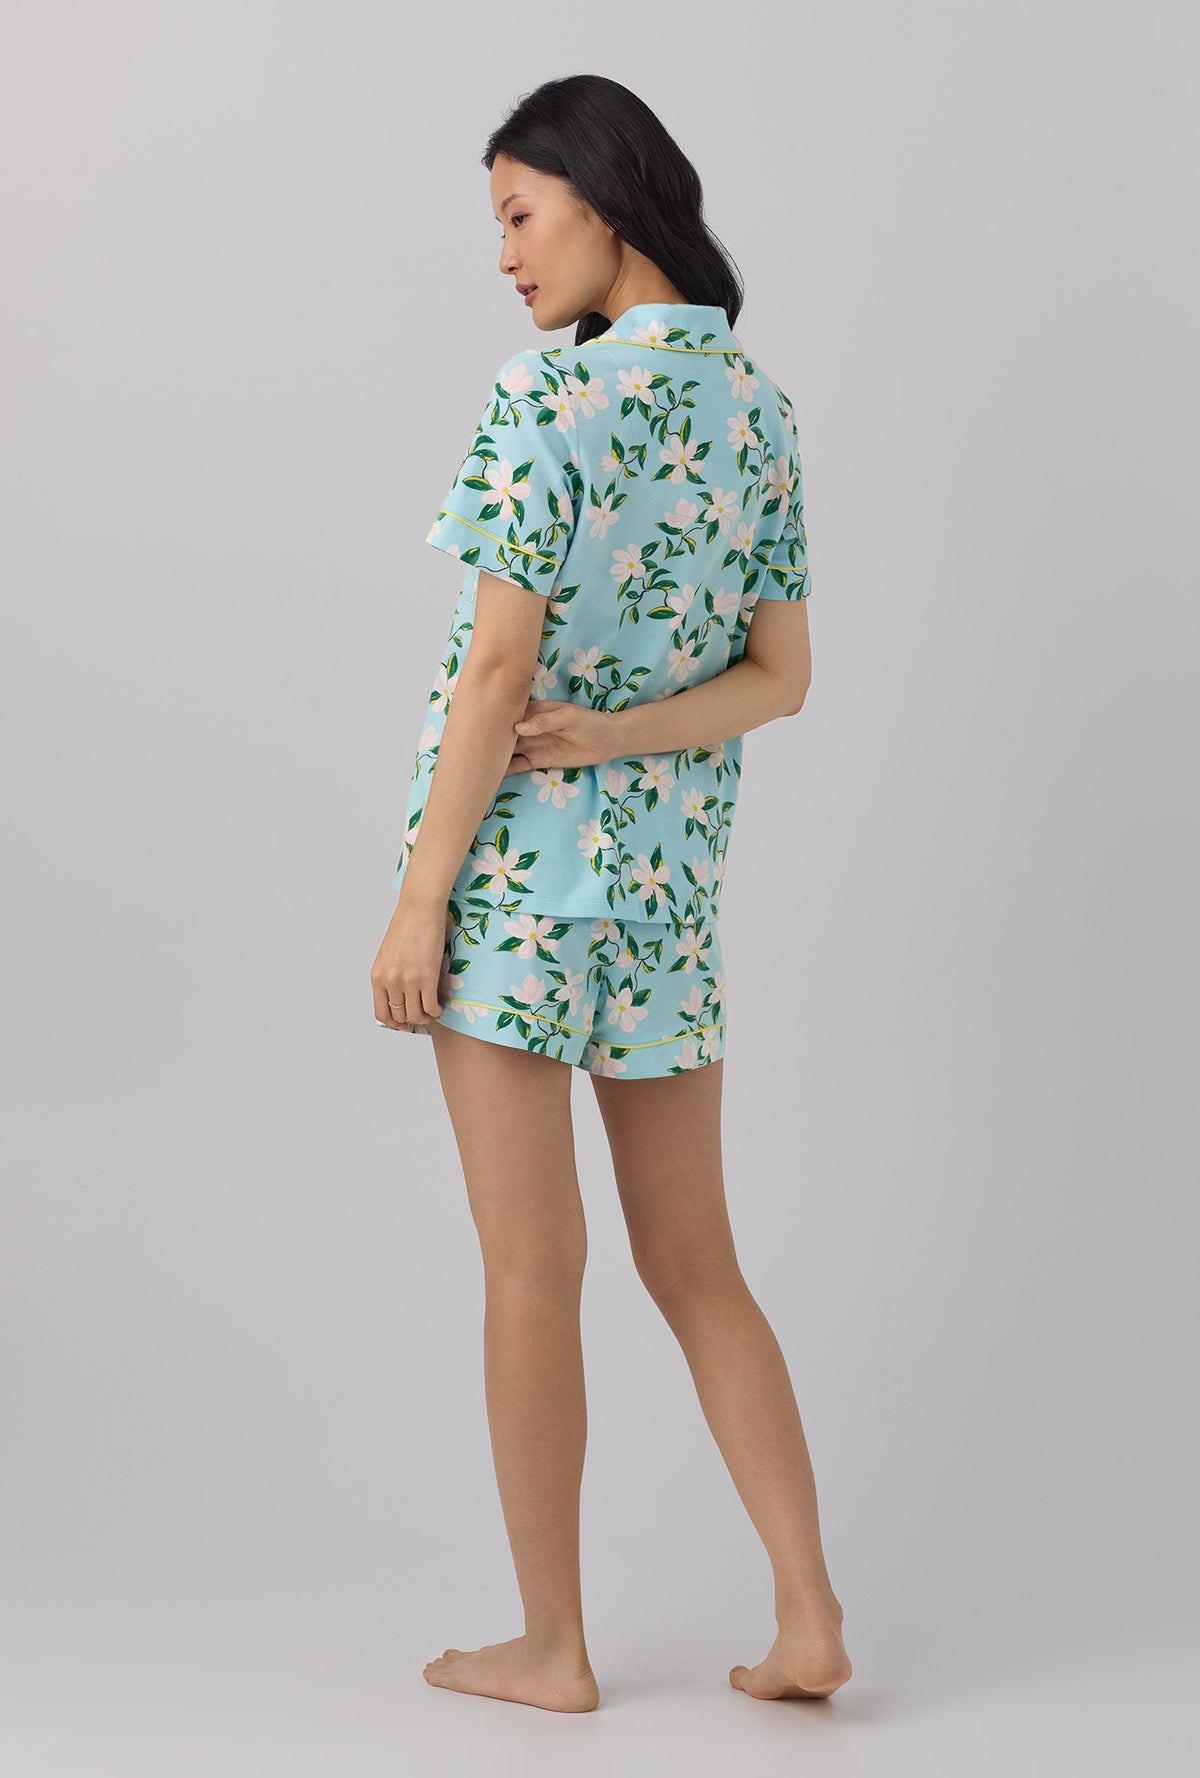 A lady wearing short sleeve classic shorty stretch jersey pj set with belle blossoms print